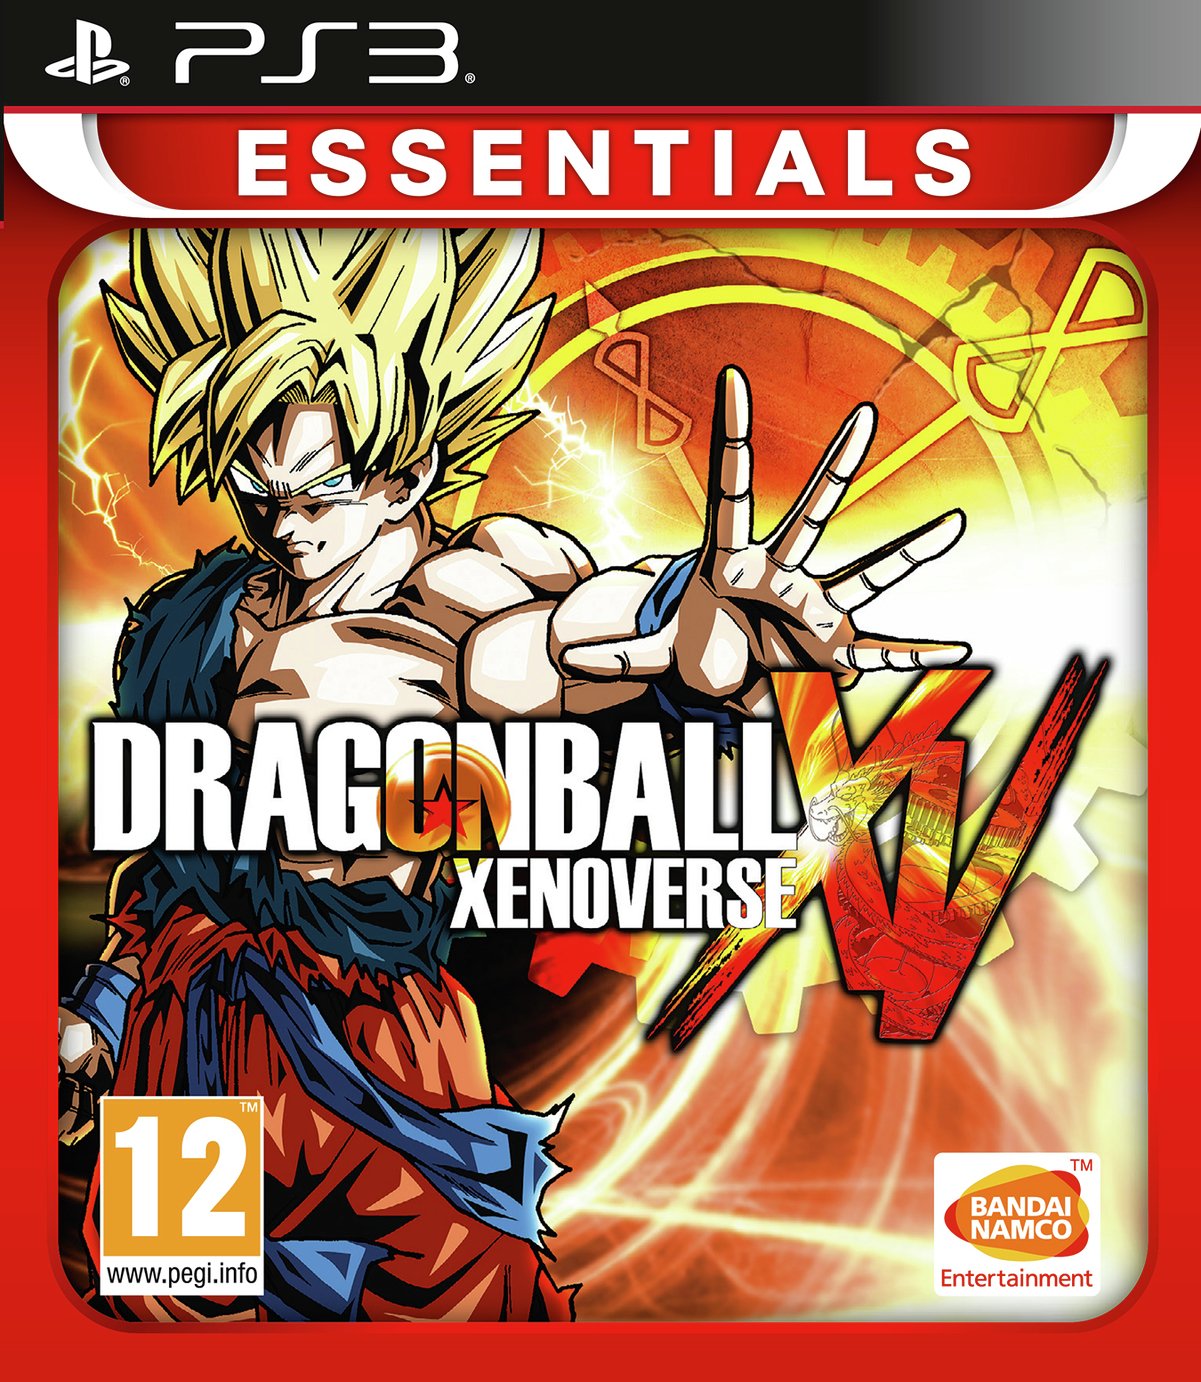 Dragon Ball Z Xenoverse Essentials PS3 Game review